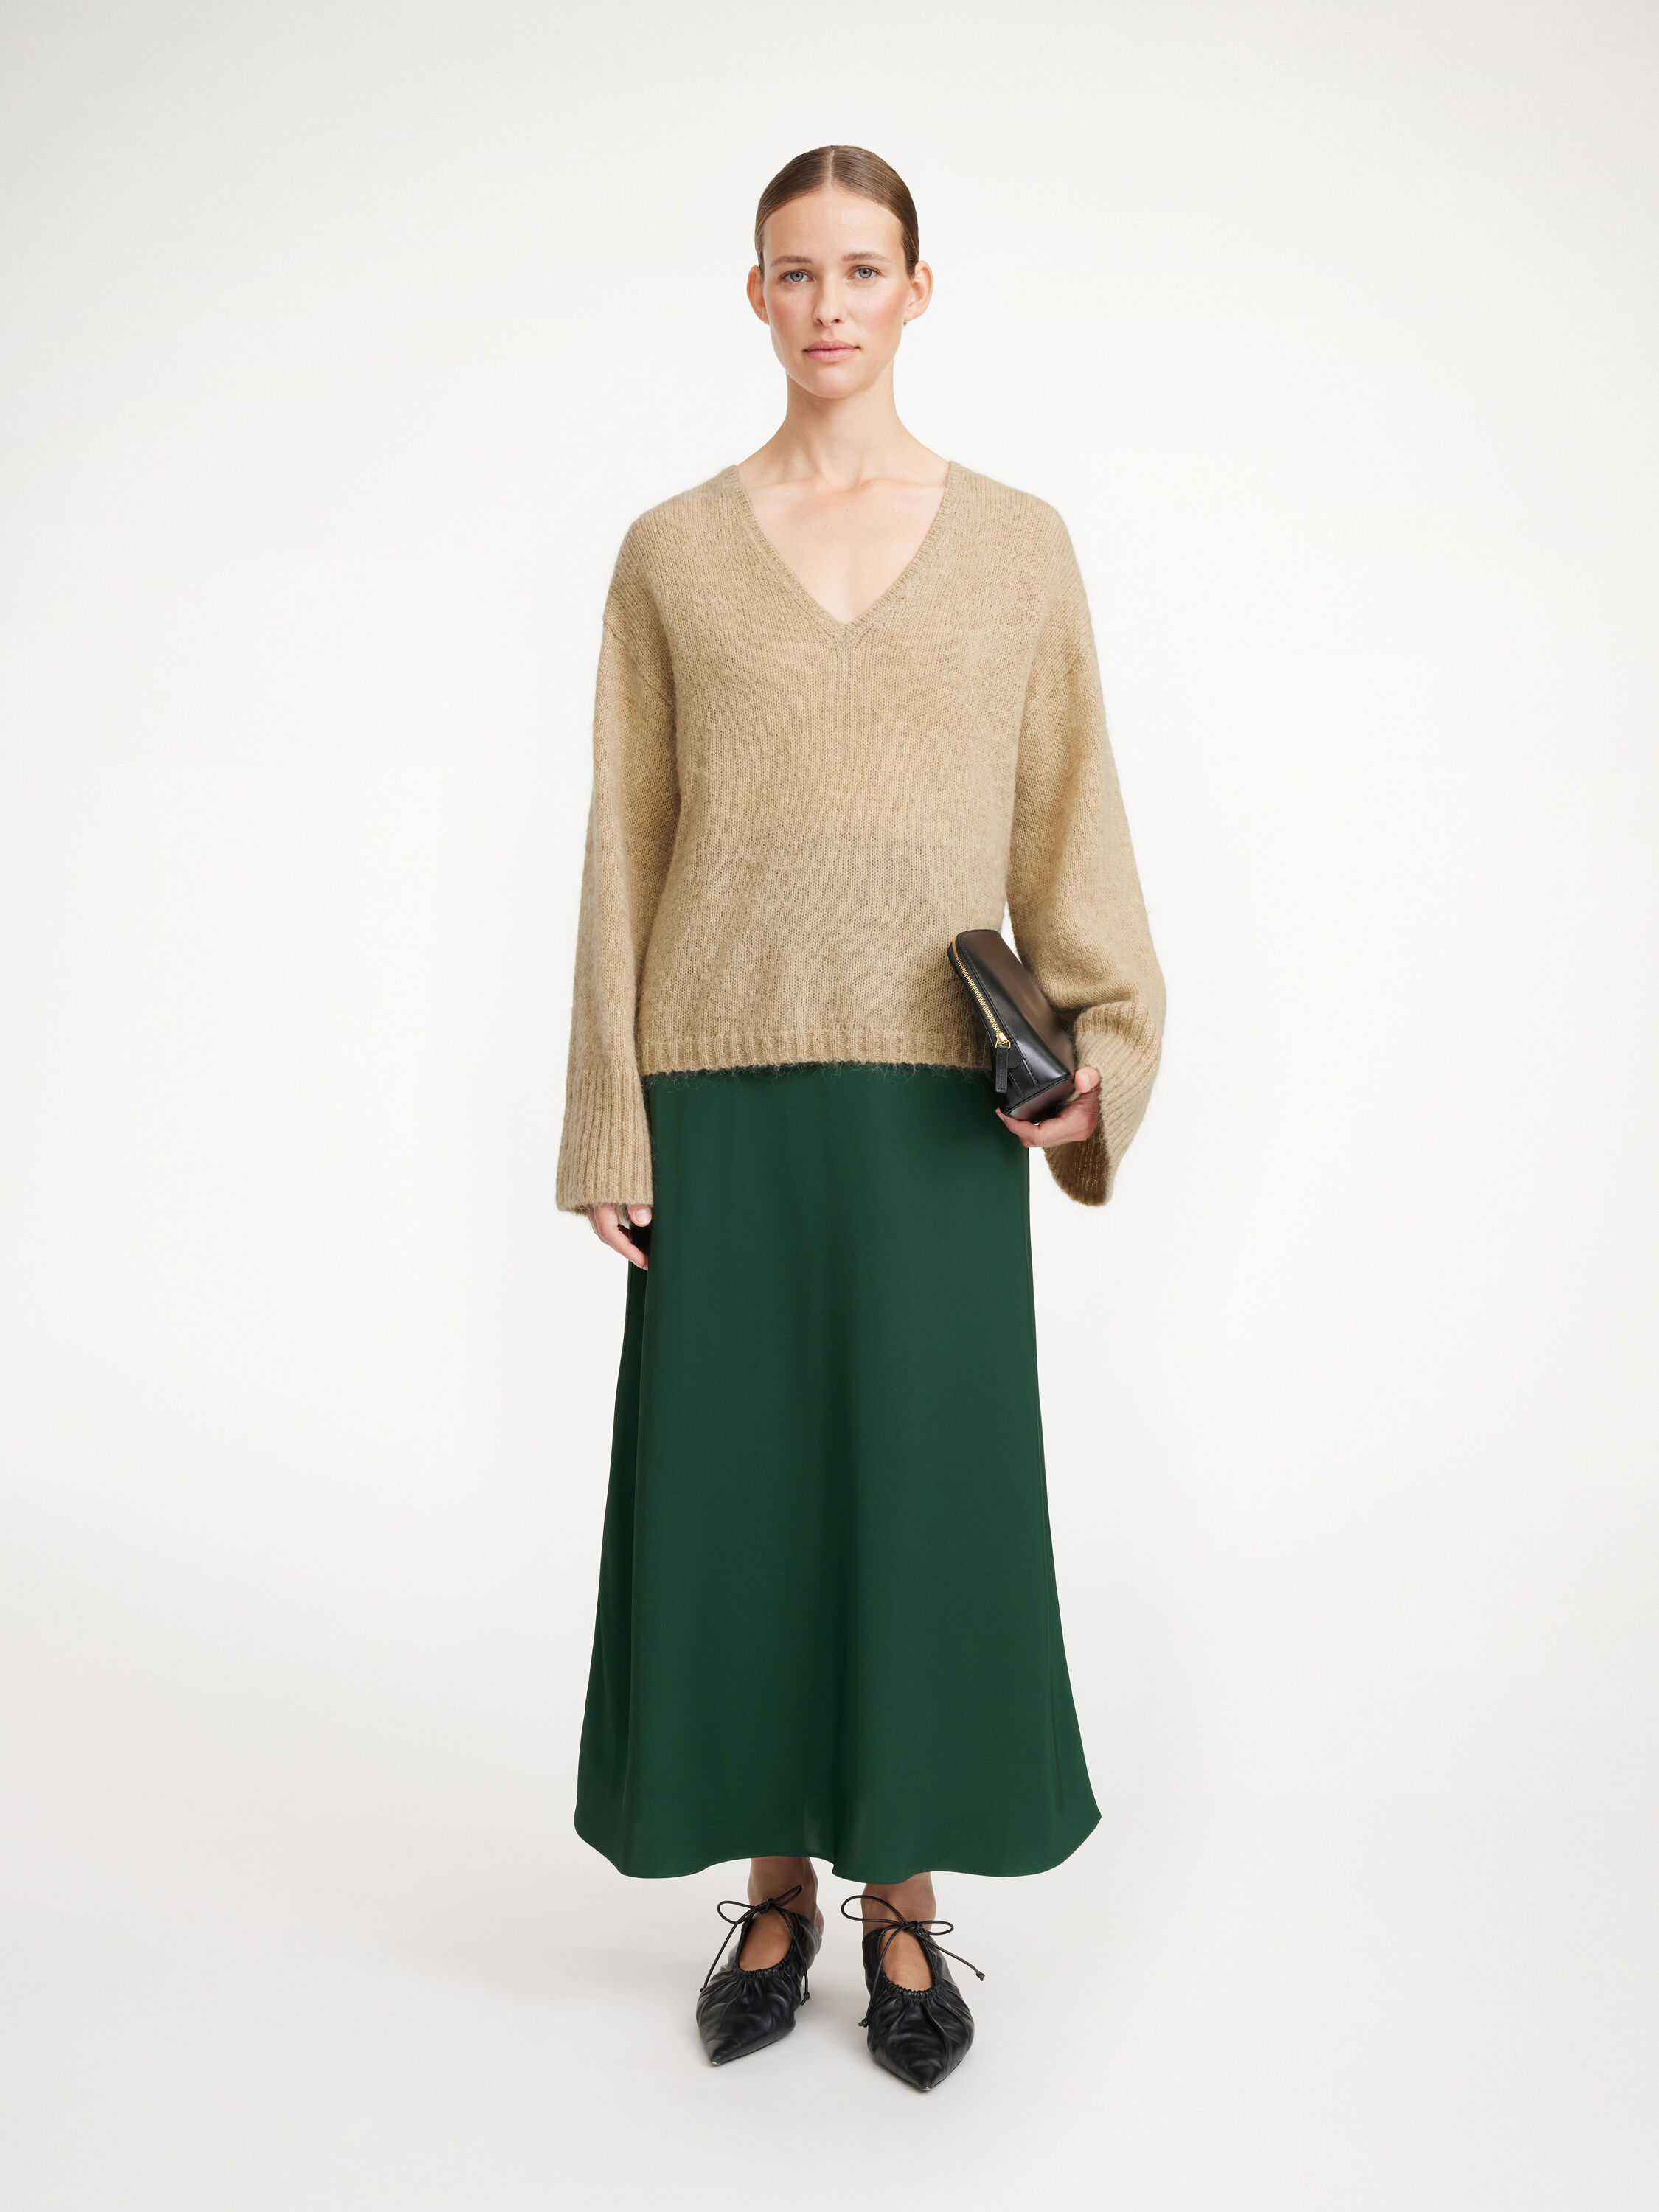 Skirts | See all styles here | By Malene Birger